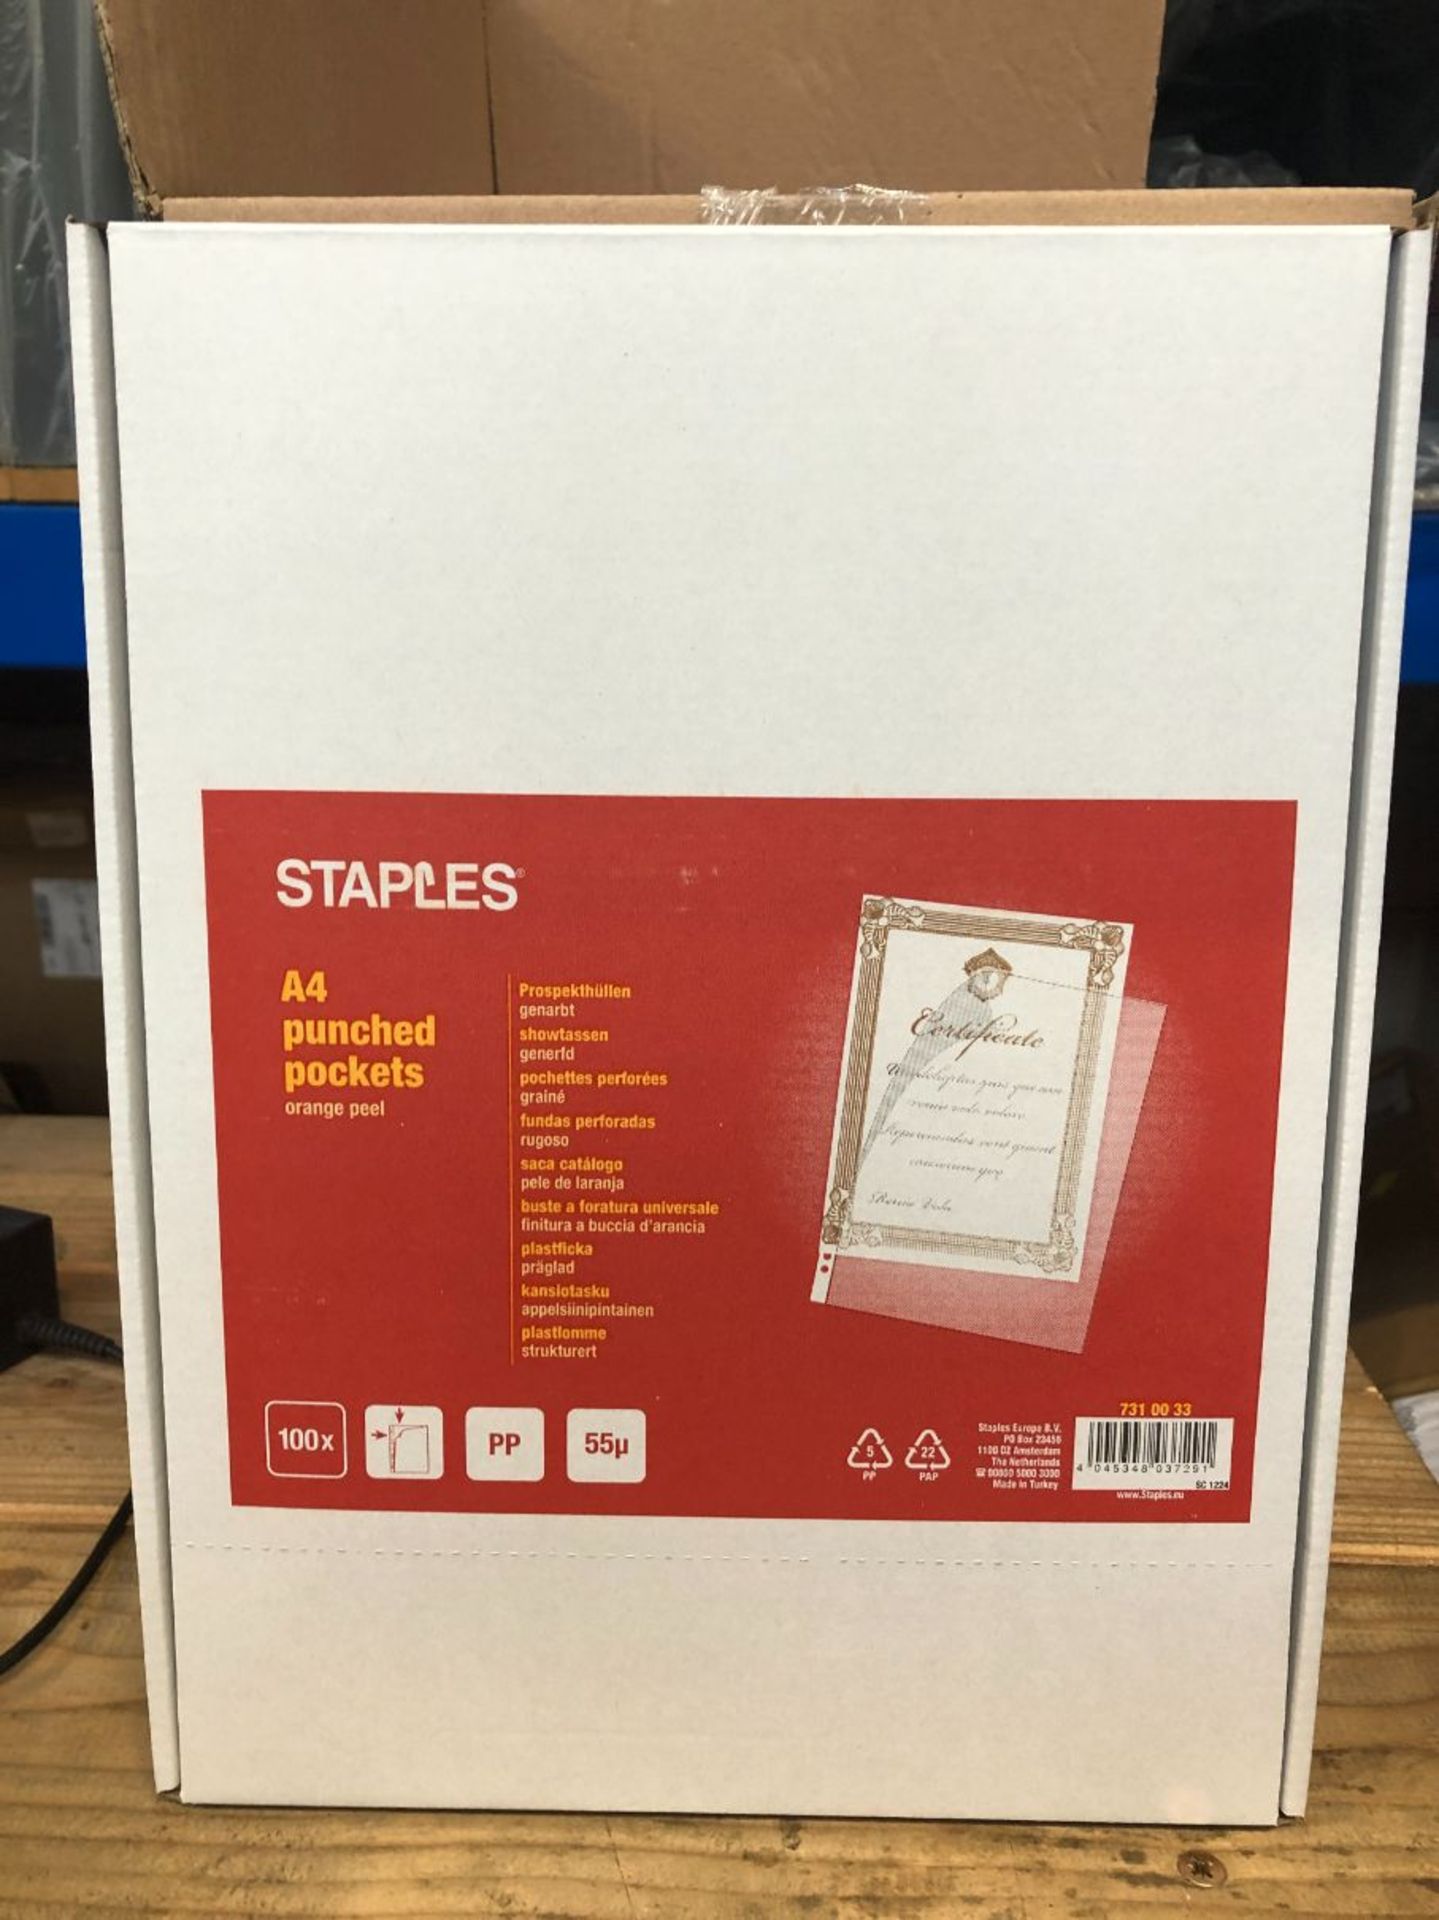 16 X PACKS OF STAPLES A4 PUNCHES POCKETS